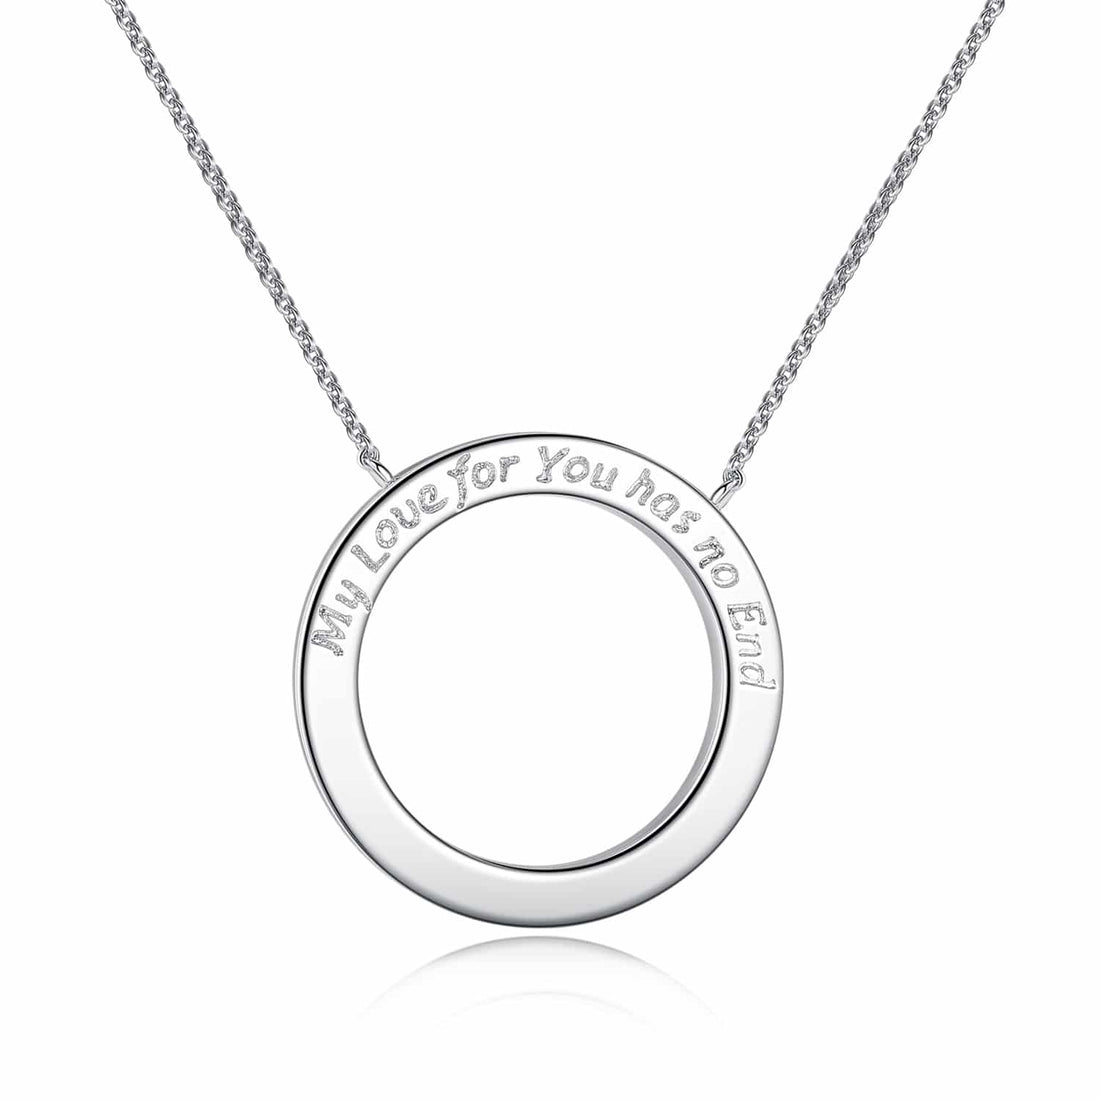 My Love for you has no end Pendant Made With Swarovski®